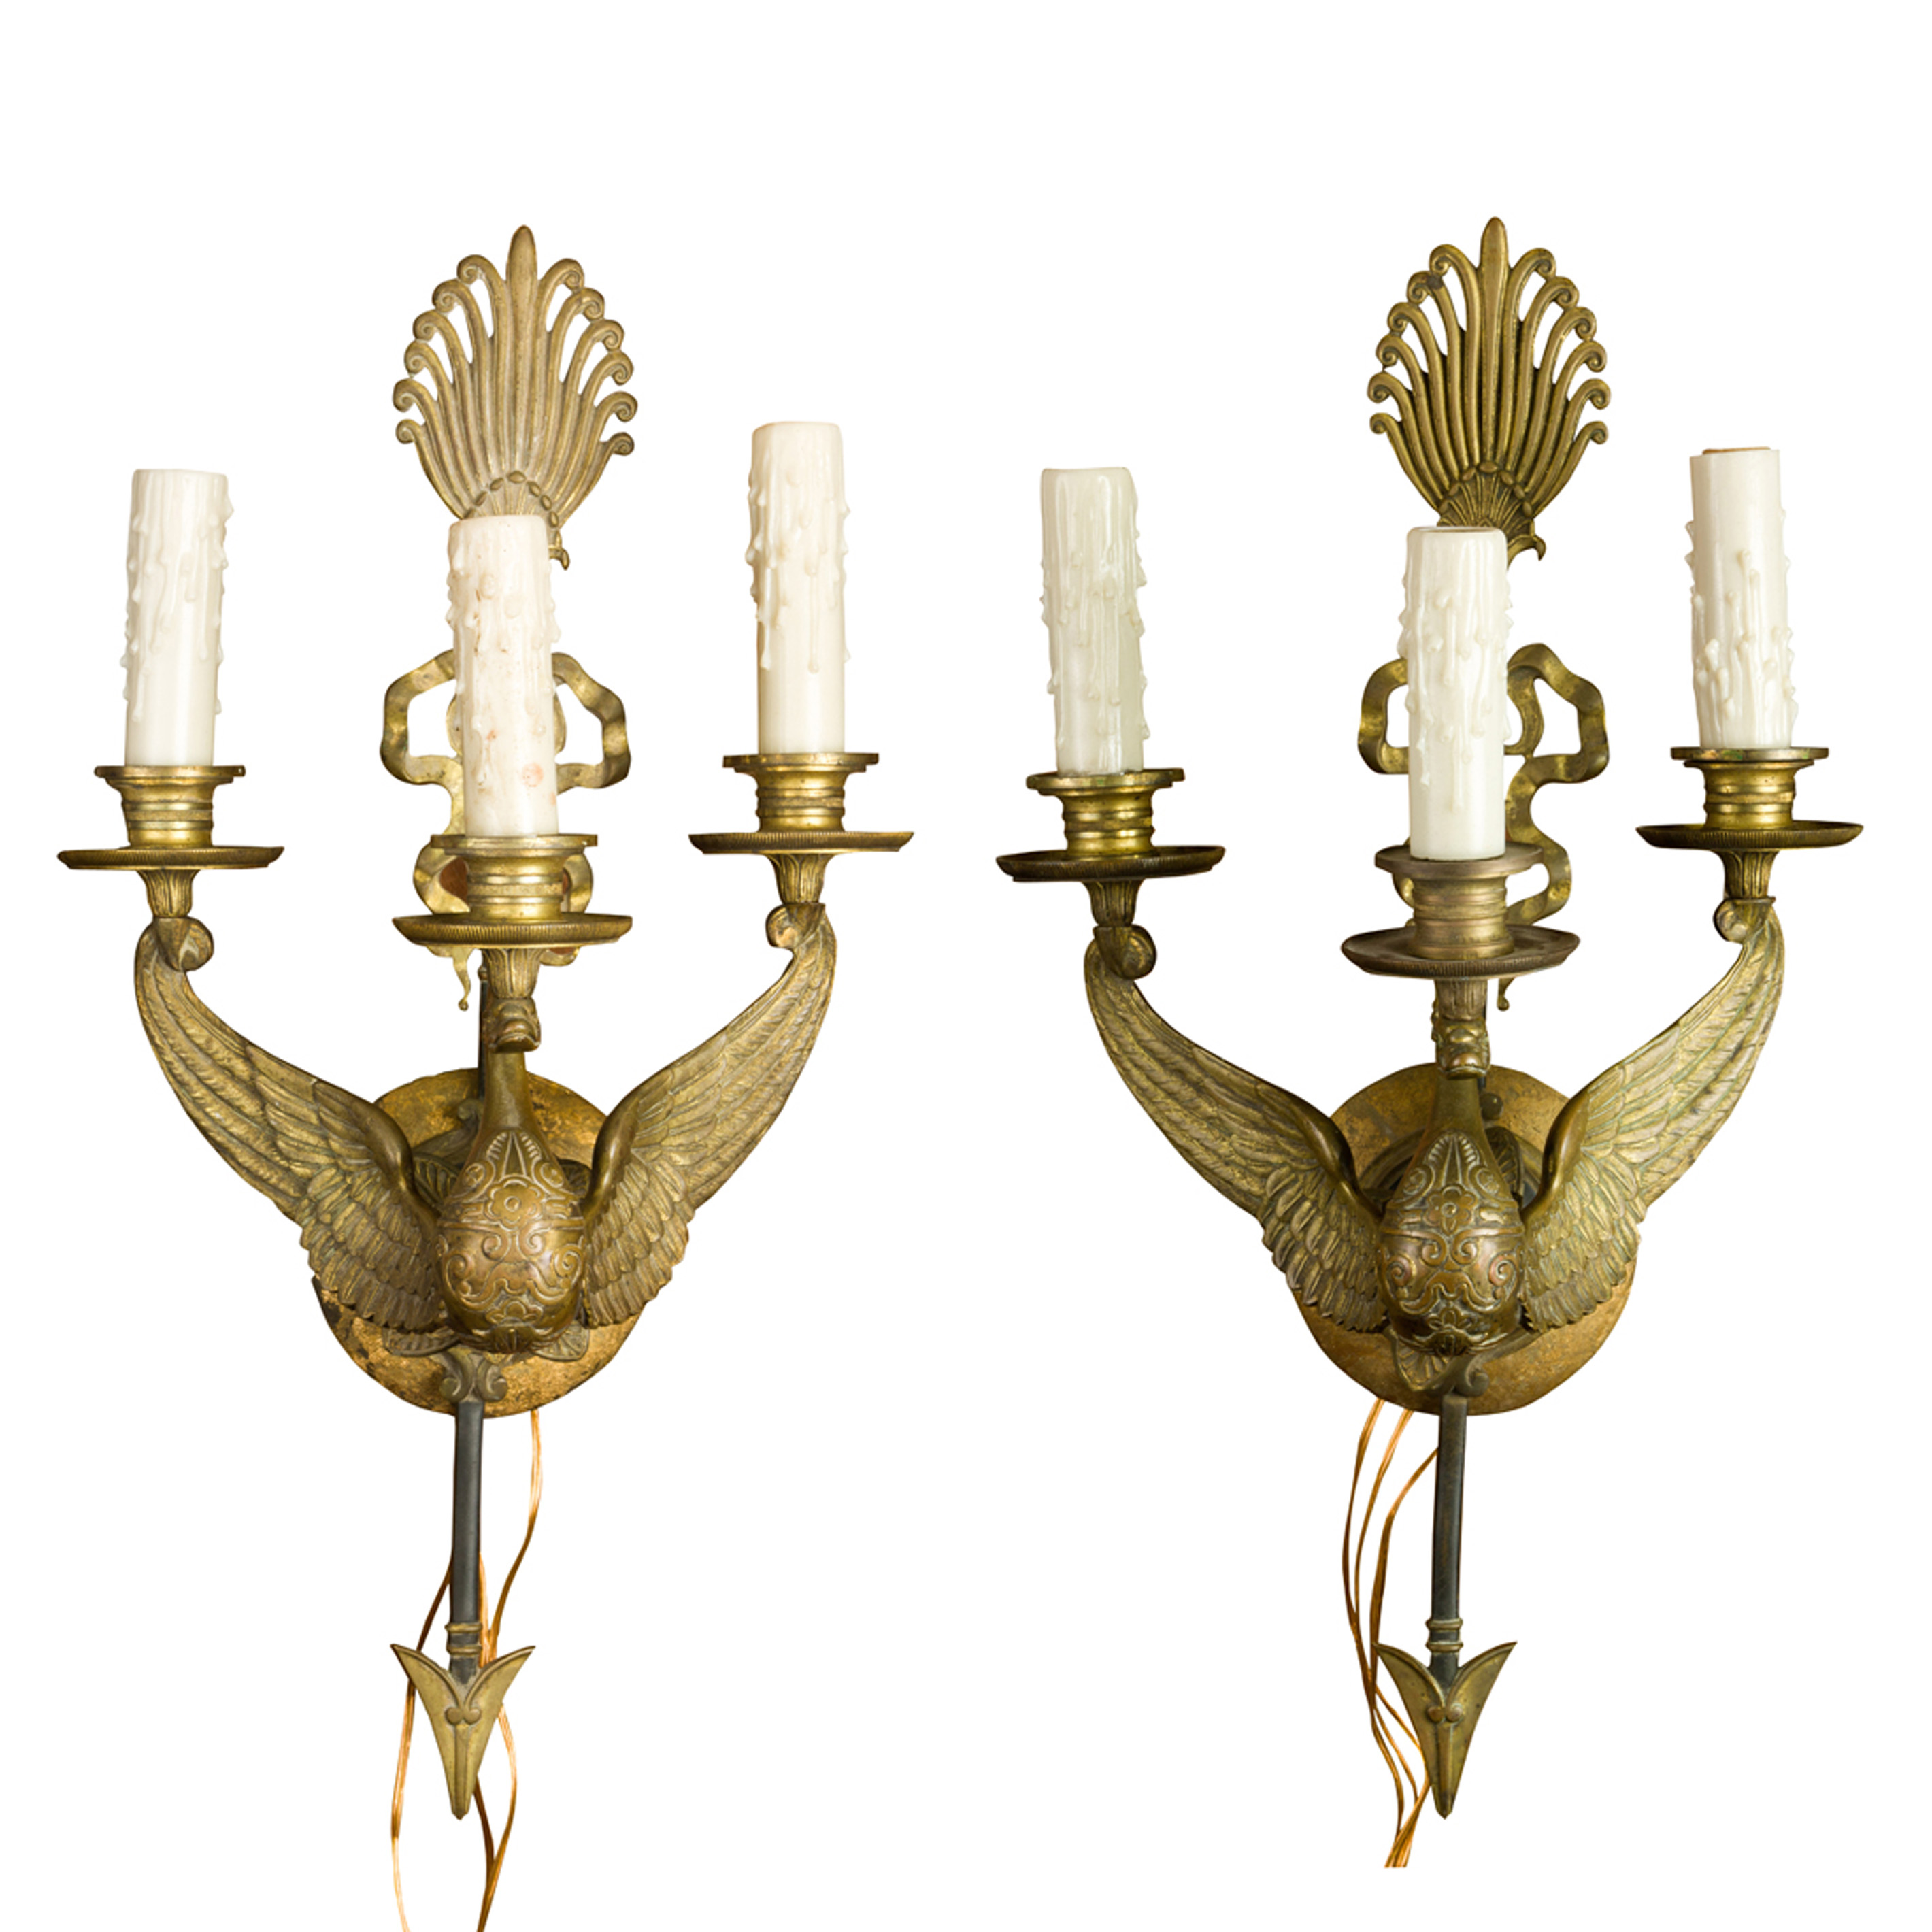 A PAIR OF EMPIRE STYLE GILT BRONZE